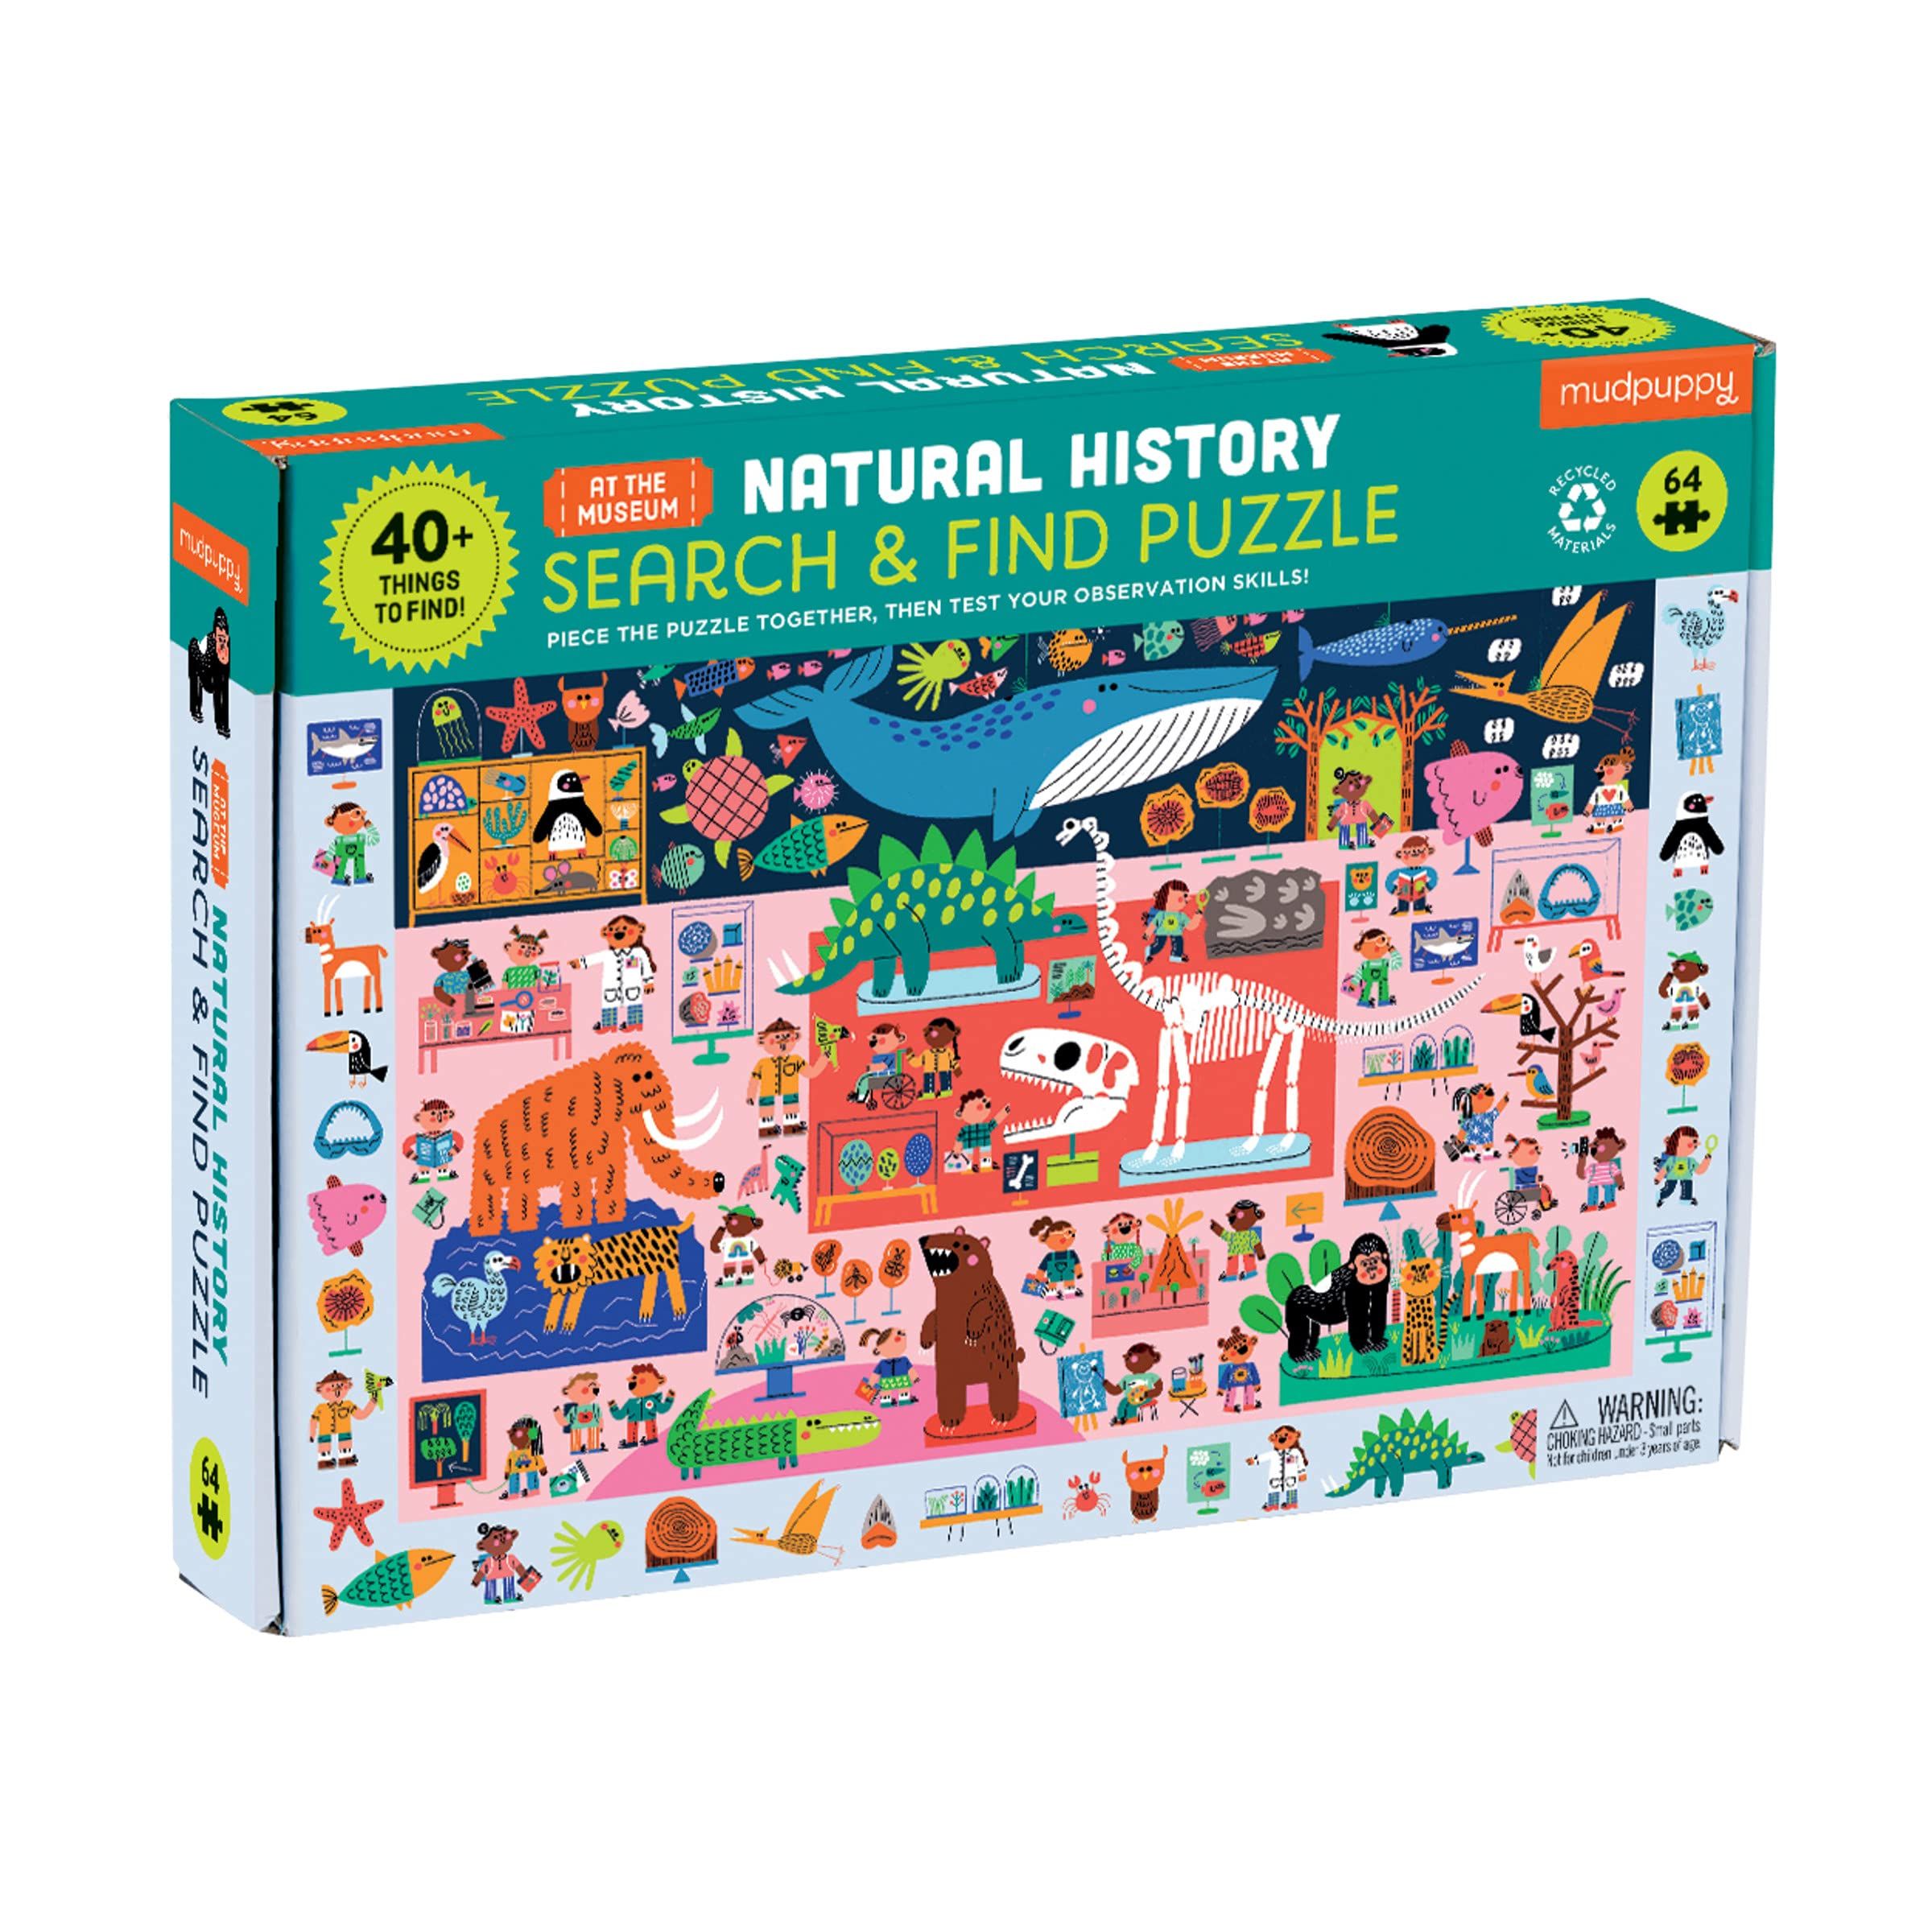 Mudpuppy Natural History Museum Search & Find Puzzle from Colorful Illustrations, Complete Puzzle to | Amazon (US)